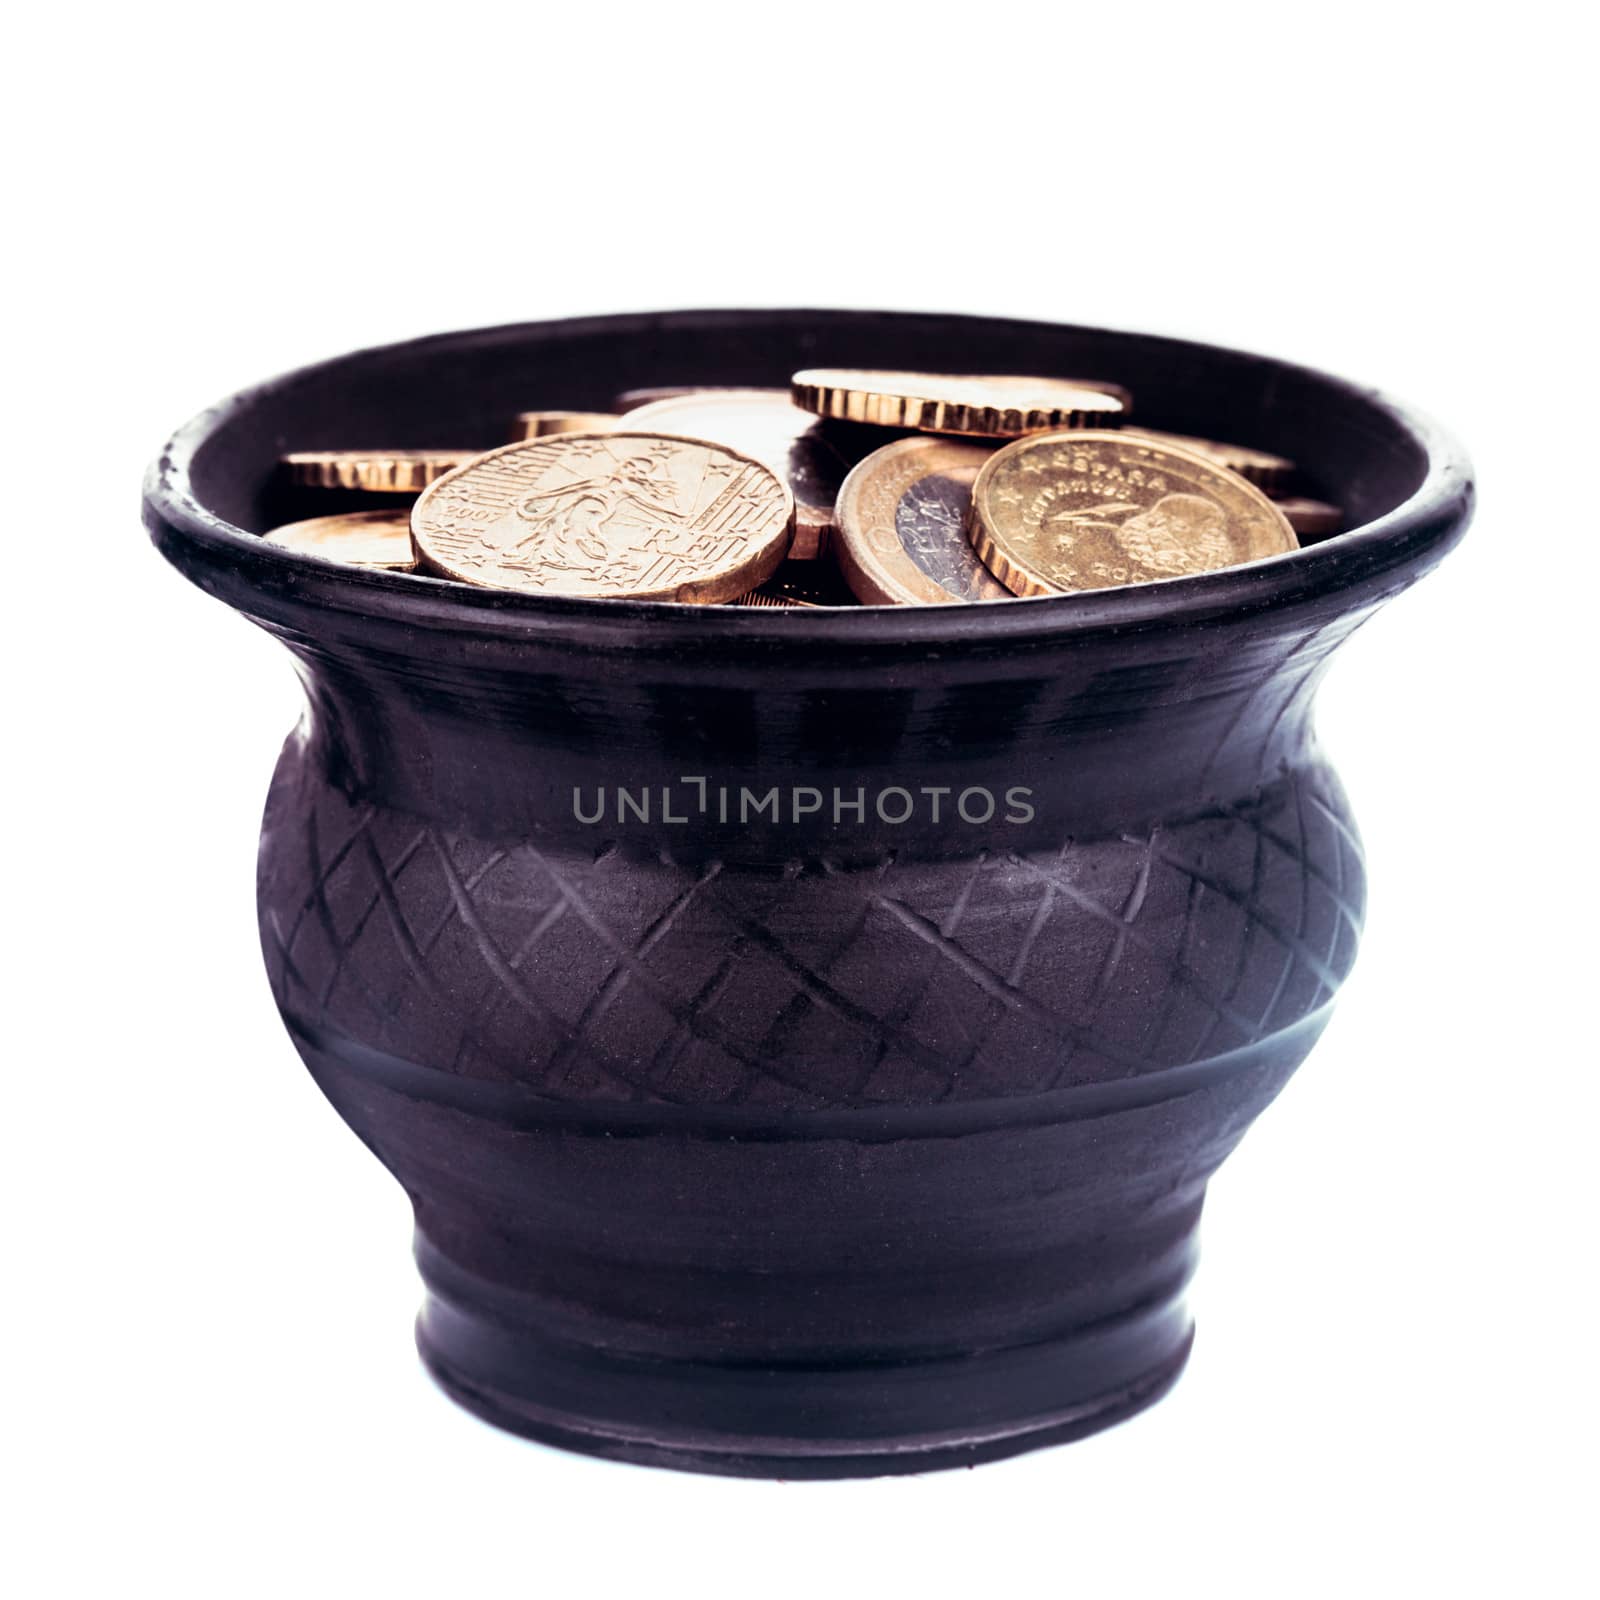 Black ceramic pot with golden coins isolated on white